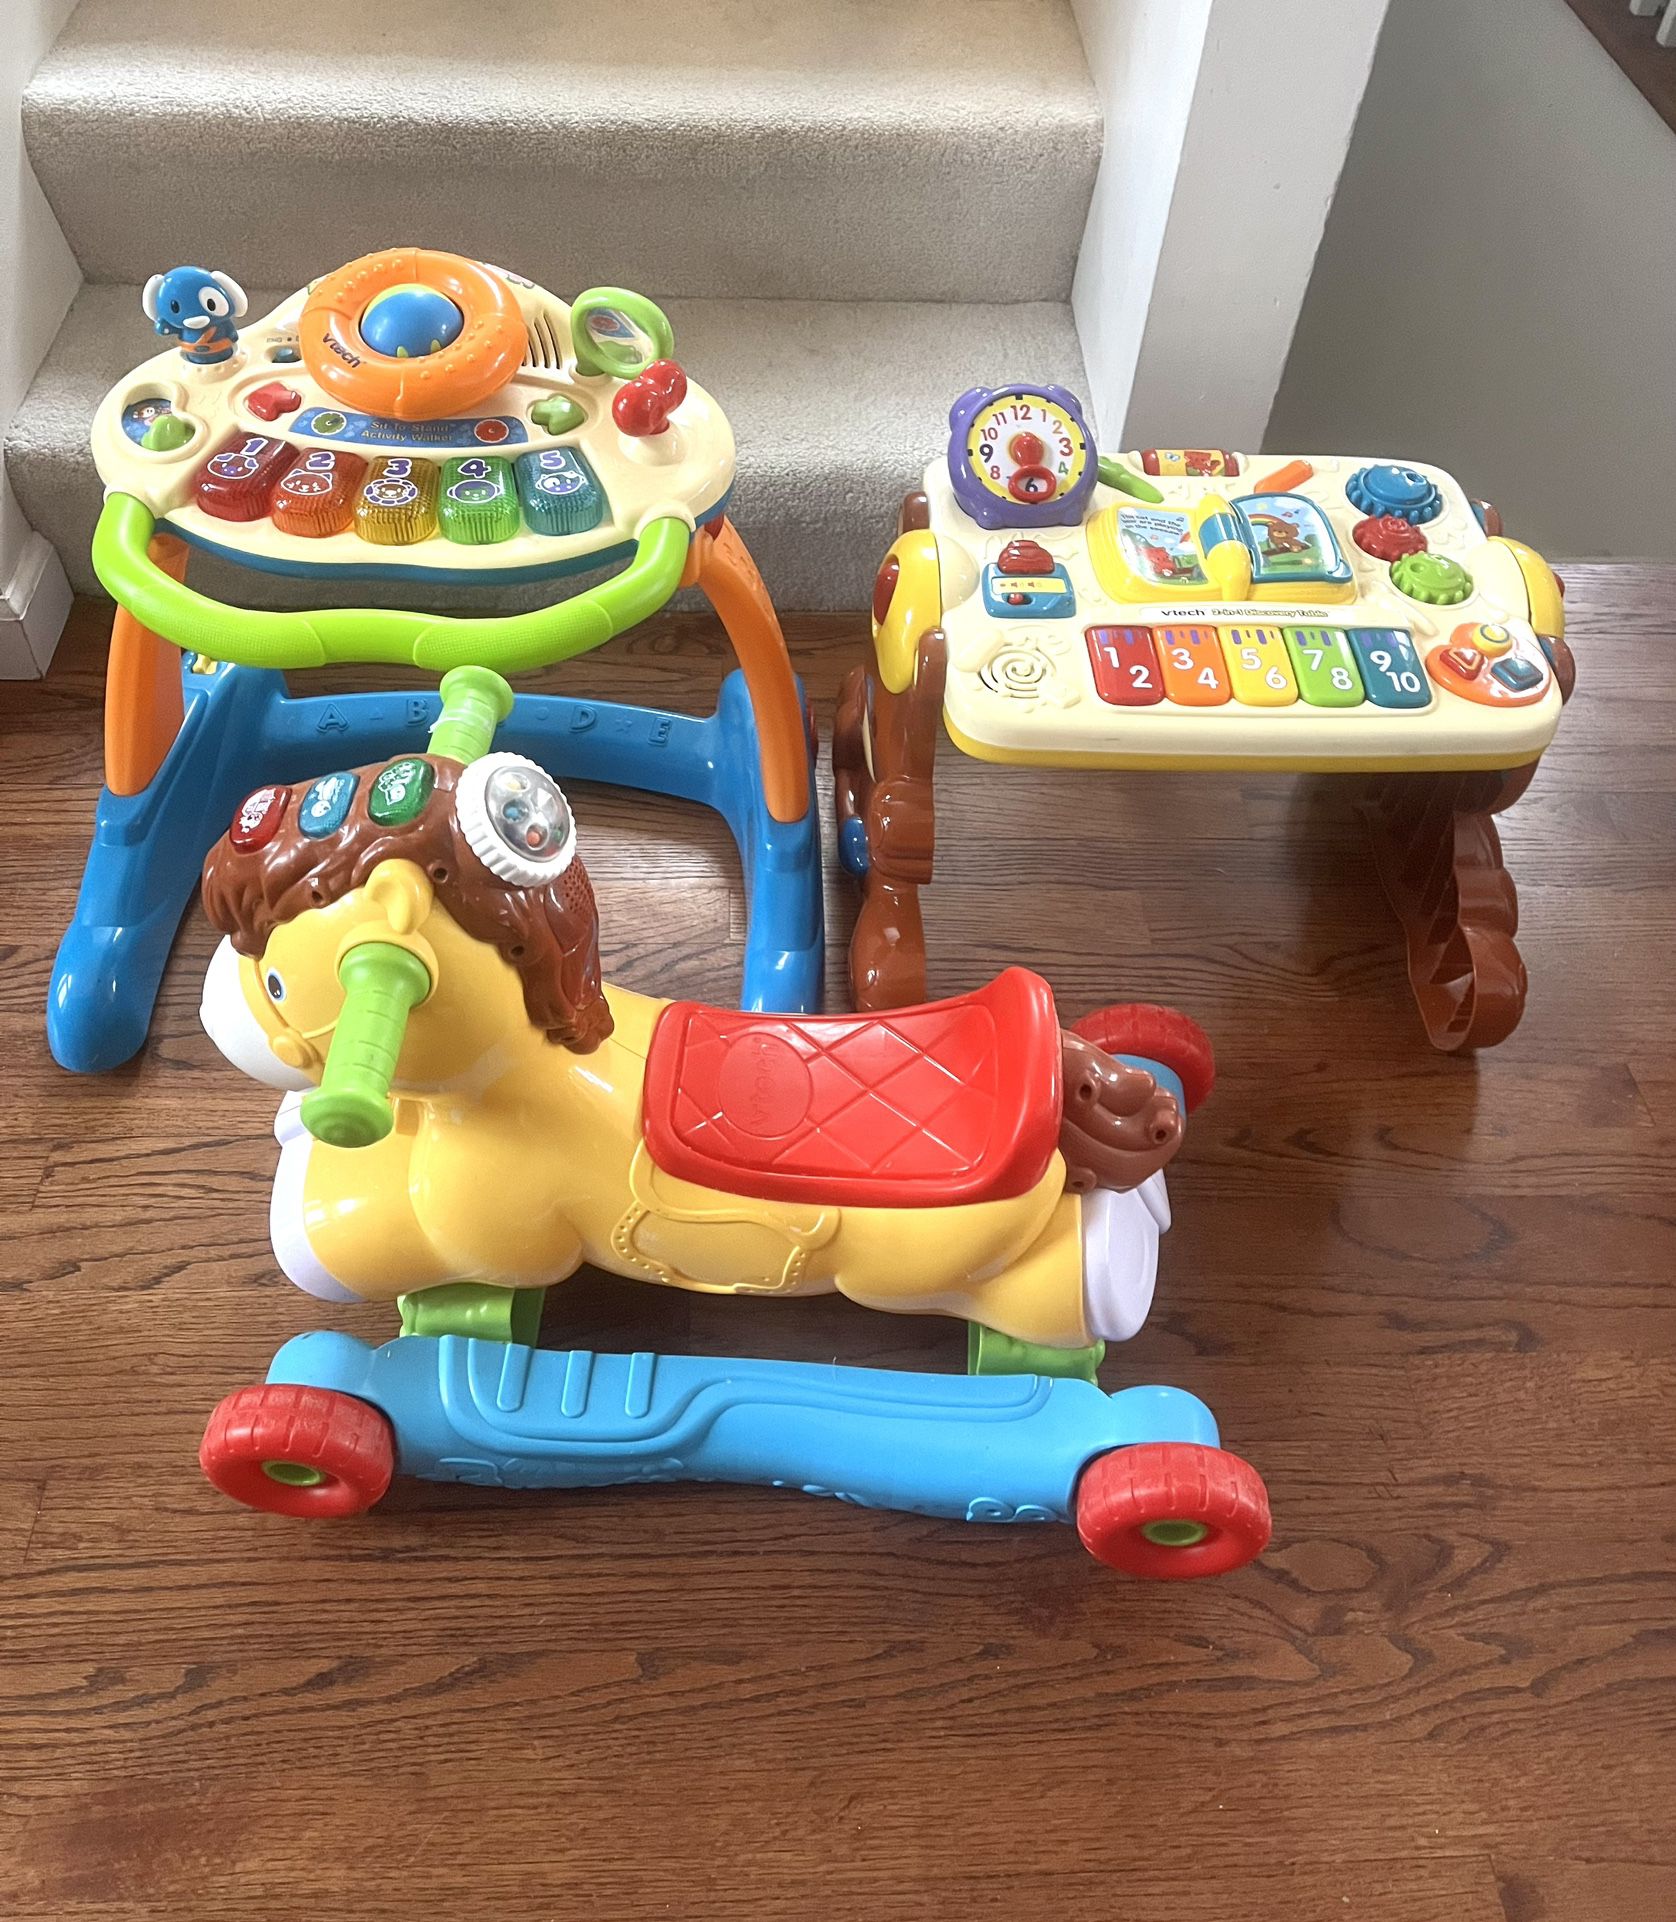 Vtech Baby Walker, Ride-On And Activity Table ($40 For All)